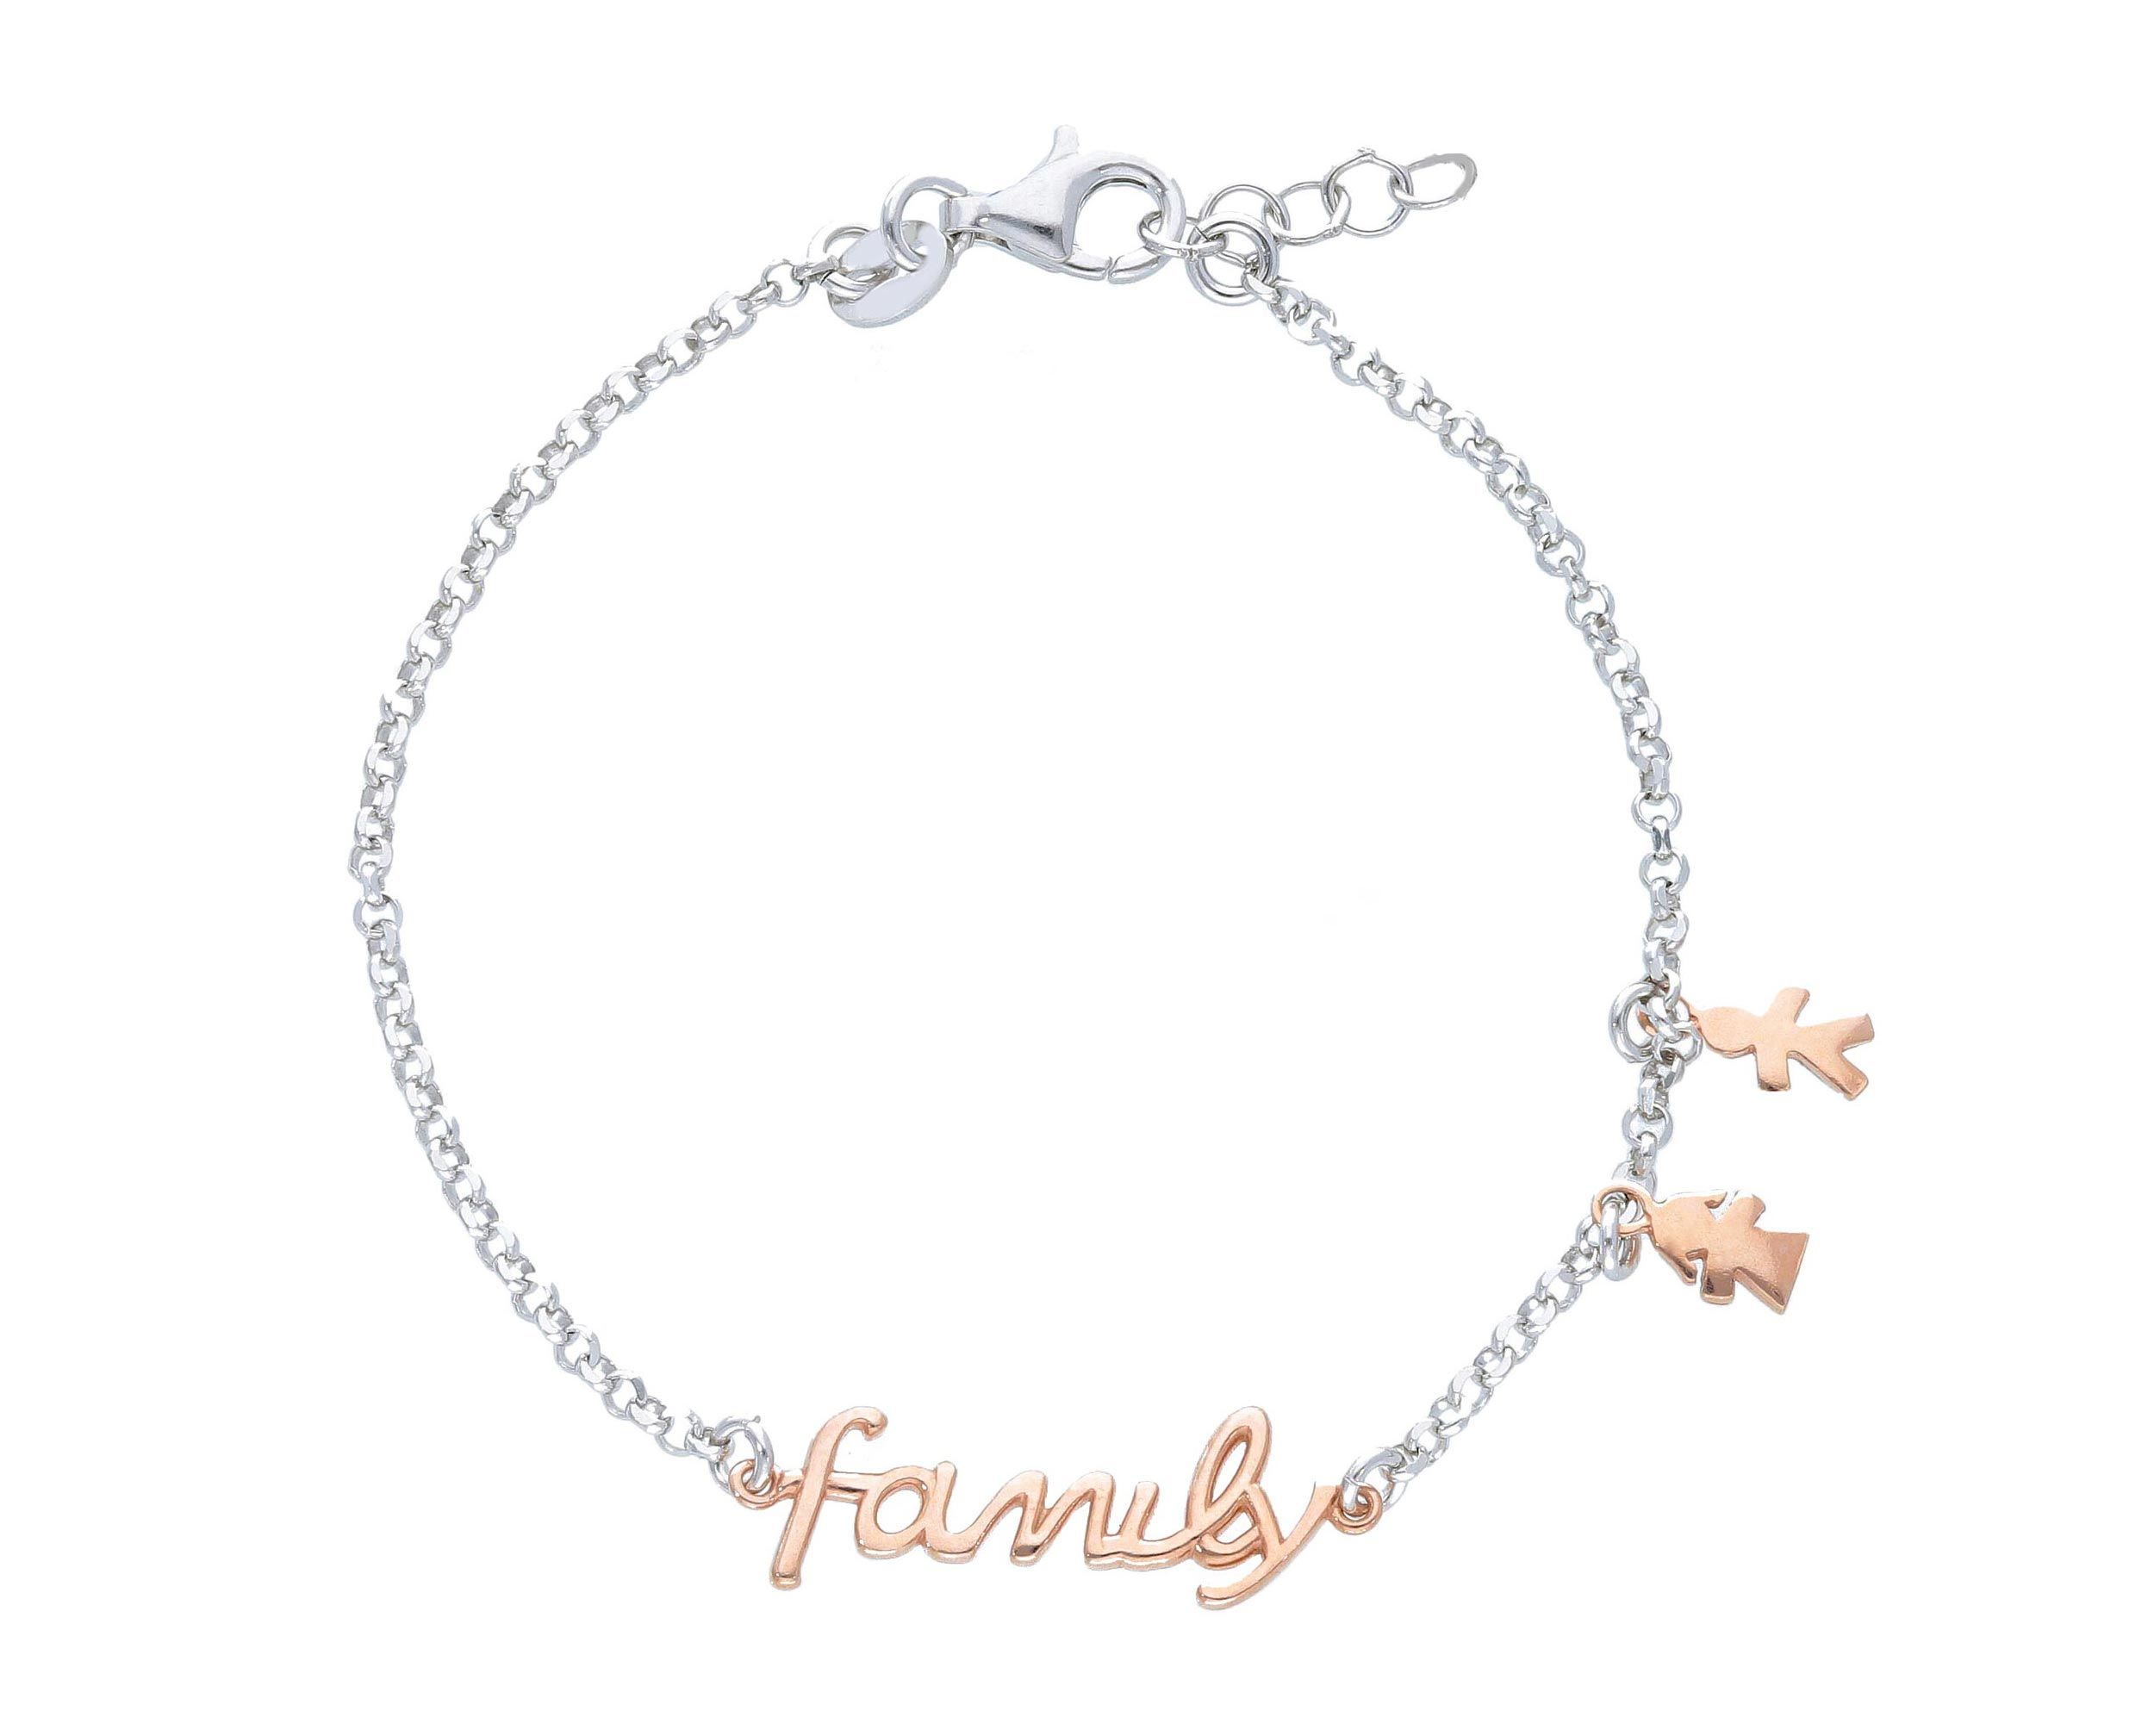  Platinum plated silver 925° bracelet with rose gold plated details (code S241518)